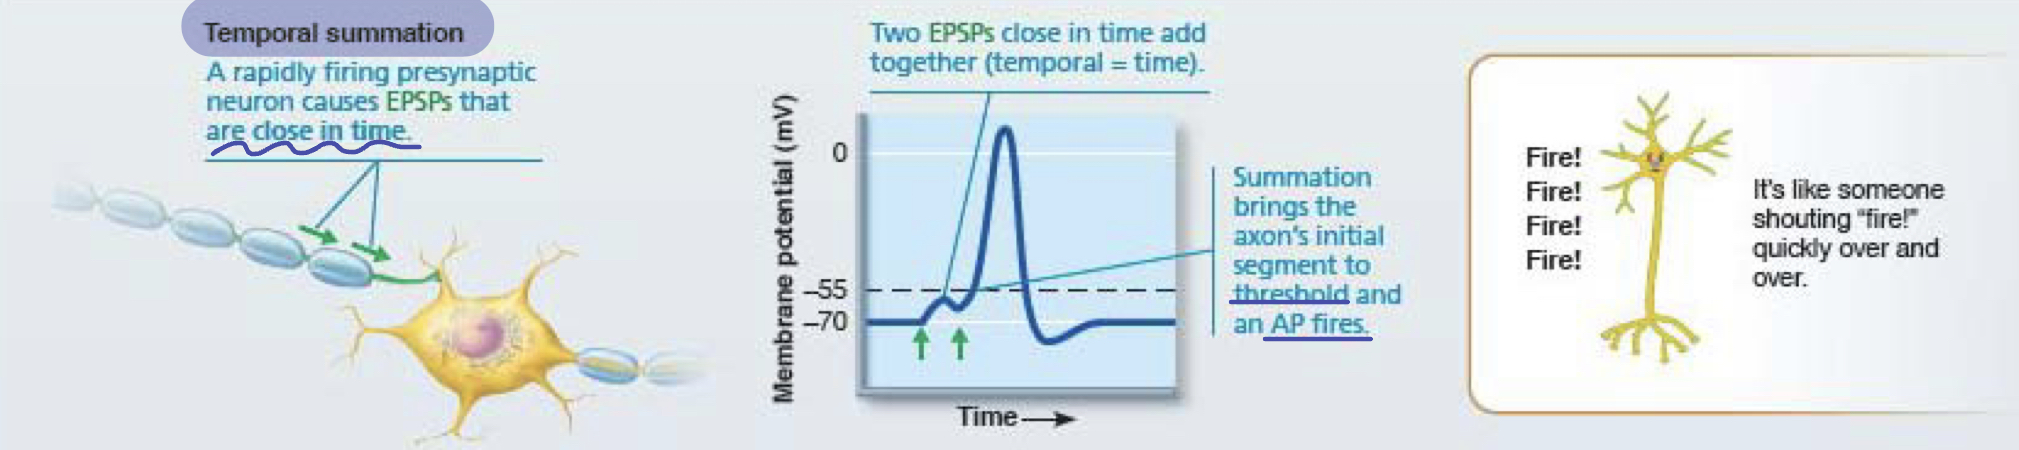 <p>a rapidly firing presynaptic neuron causes EPSPs that are close in time --&gt; summation brings axon to threshold --&gt; action potential fires</p><p>multiple rapid signals--&gt; summation --&gt; reaches threshold --&gt; neuron fires</p>